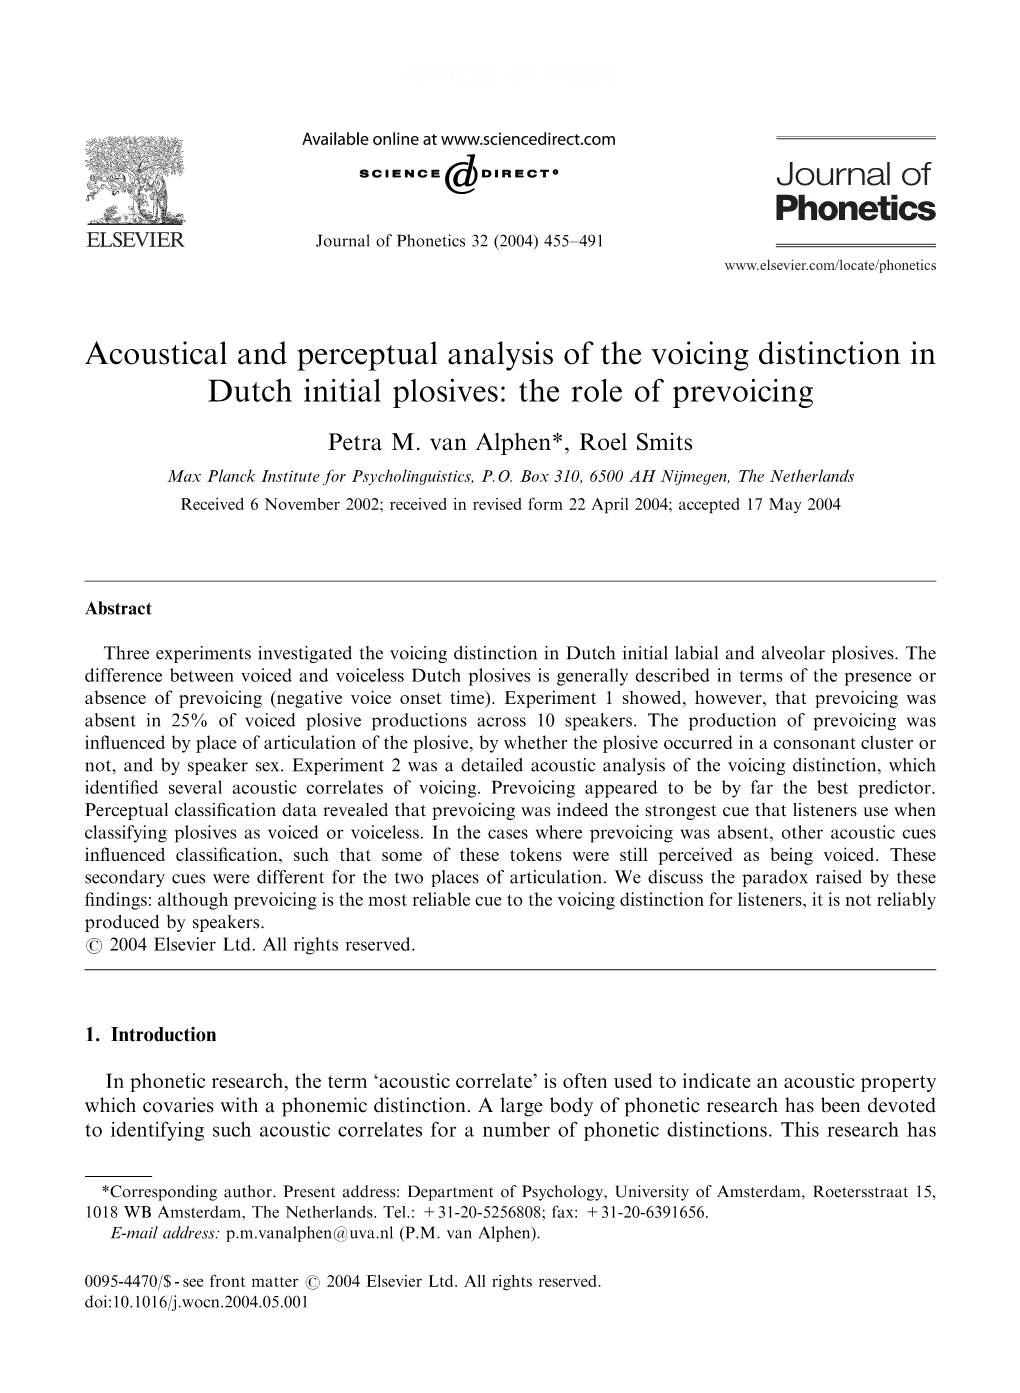 Acoustical and Perceptual Analysis of the Voicing Distinction in Dutch Initial Plosives: the Role of Prevoicing Petra M